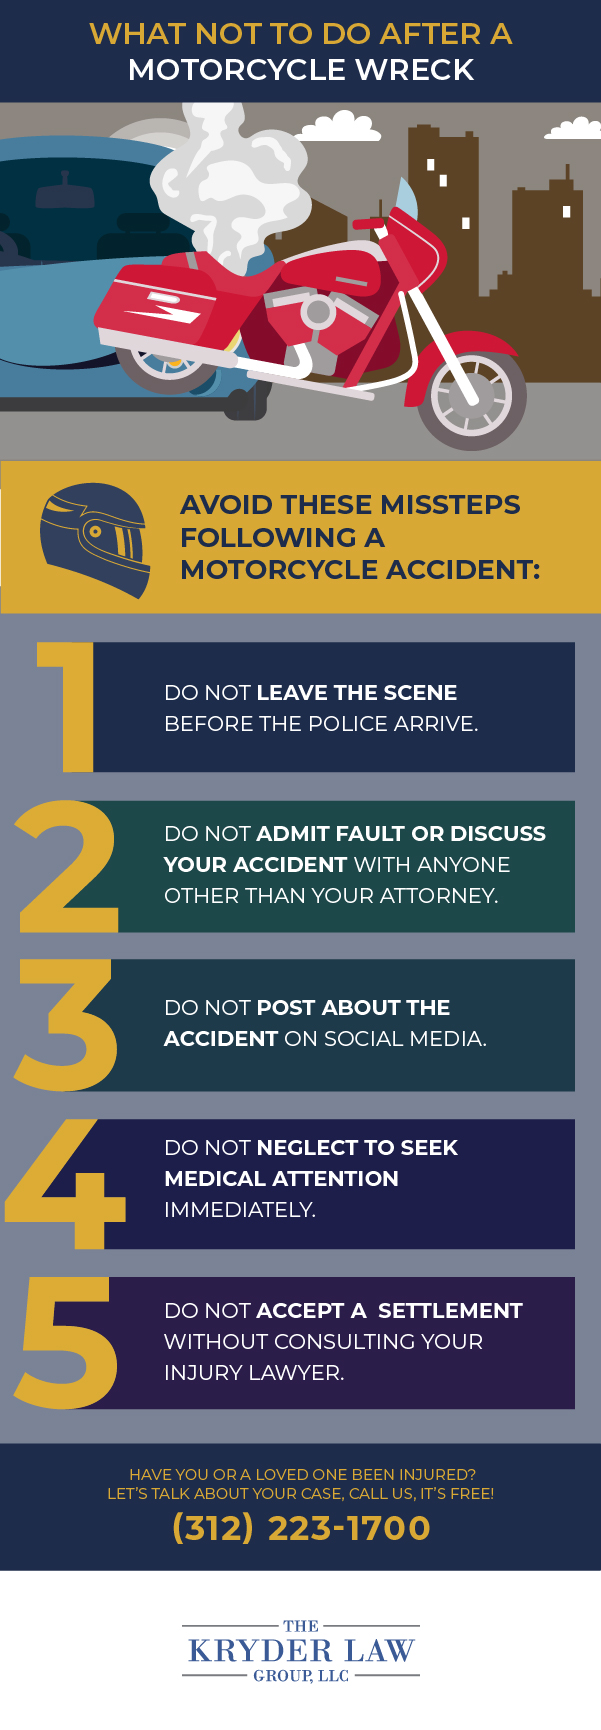 What NOT To Do After a Motorcycle Wreck